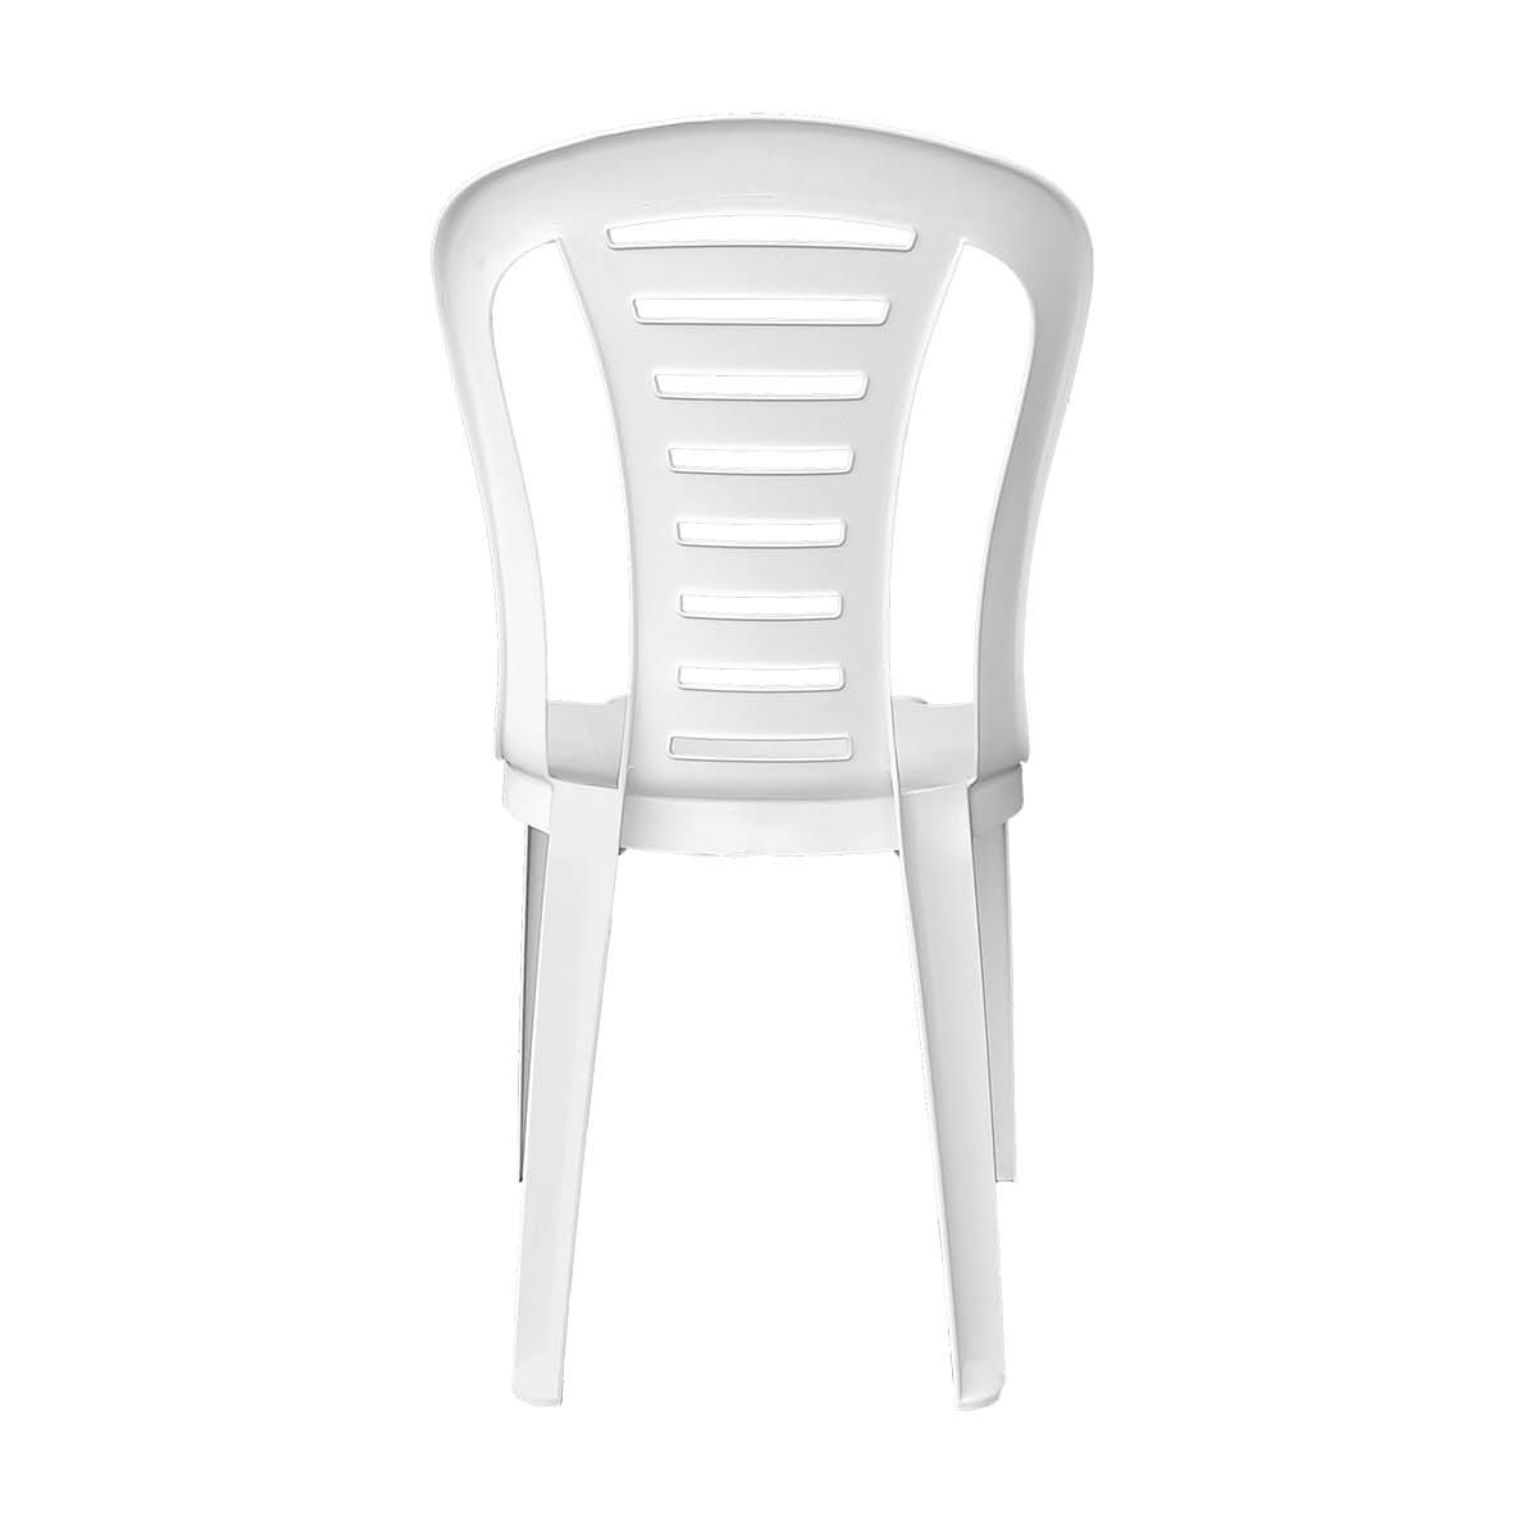 Stacking bistro chair - white